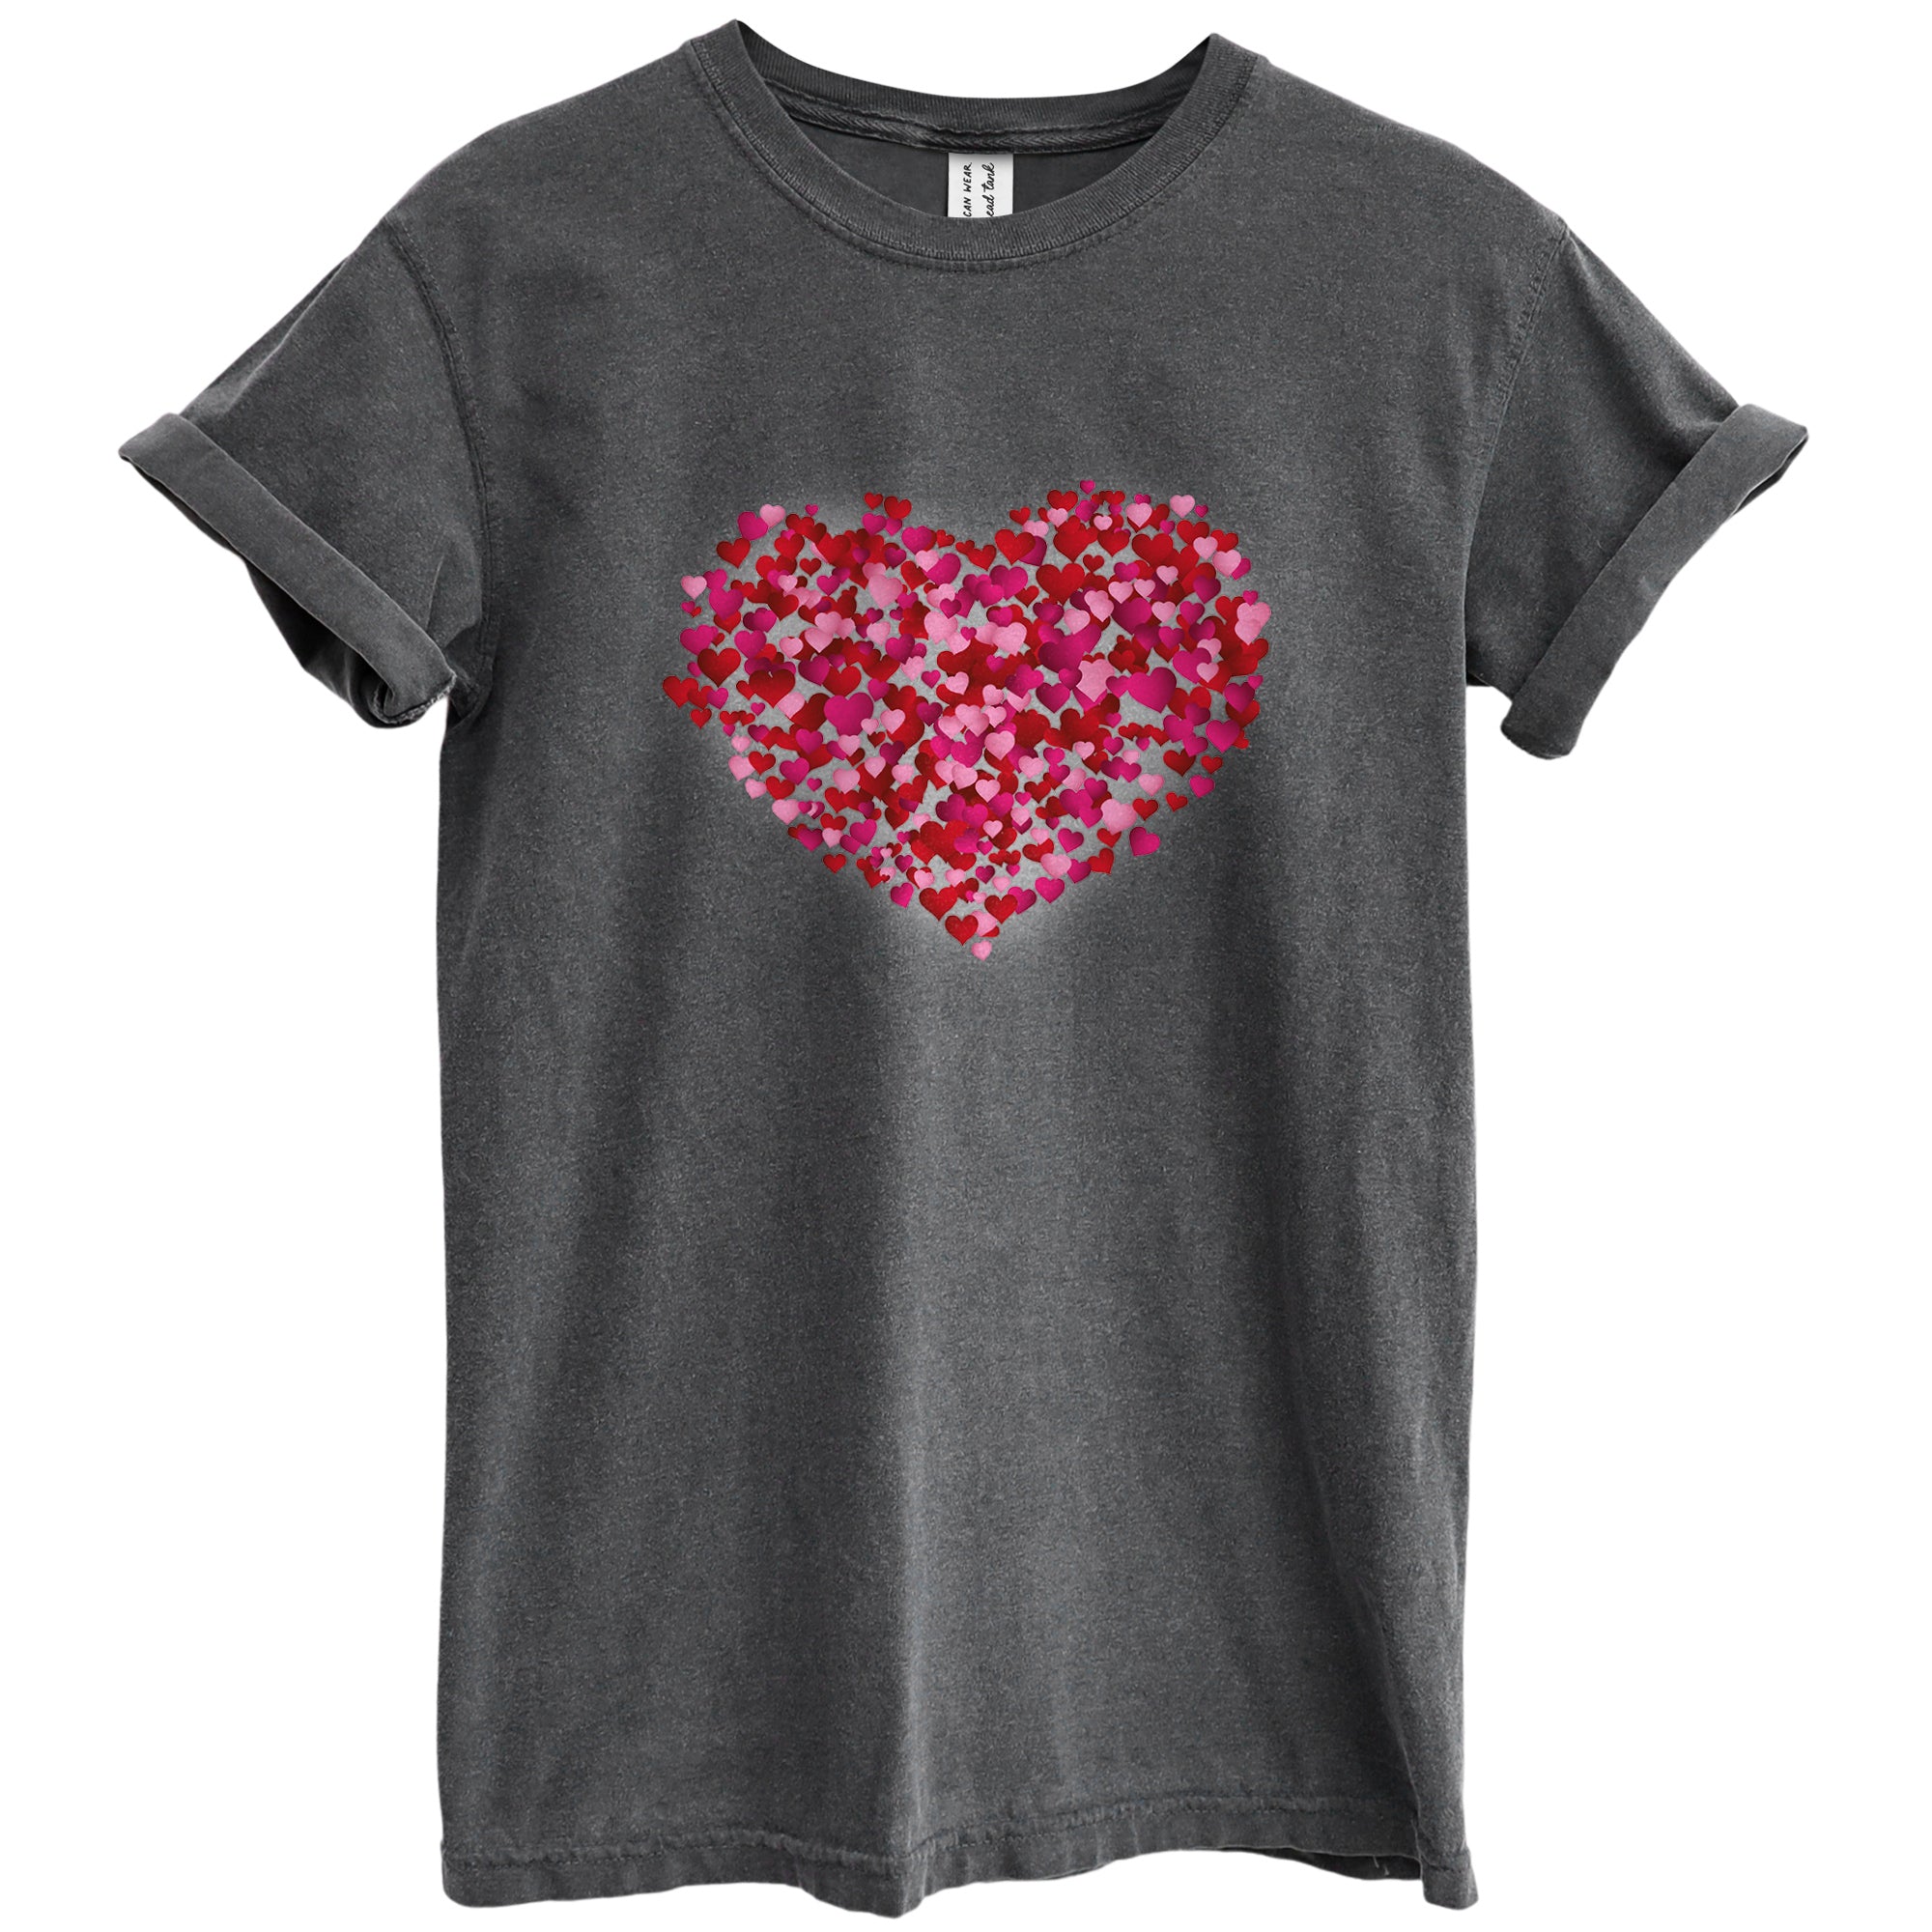 Floating Heart Valentines Shirt Garment-Dyed Tee